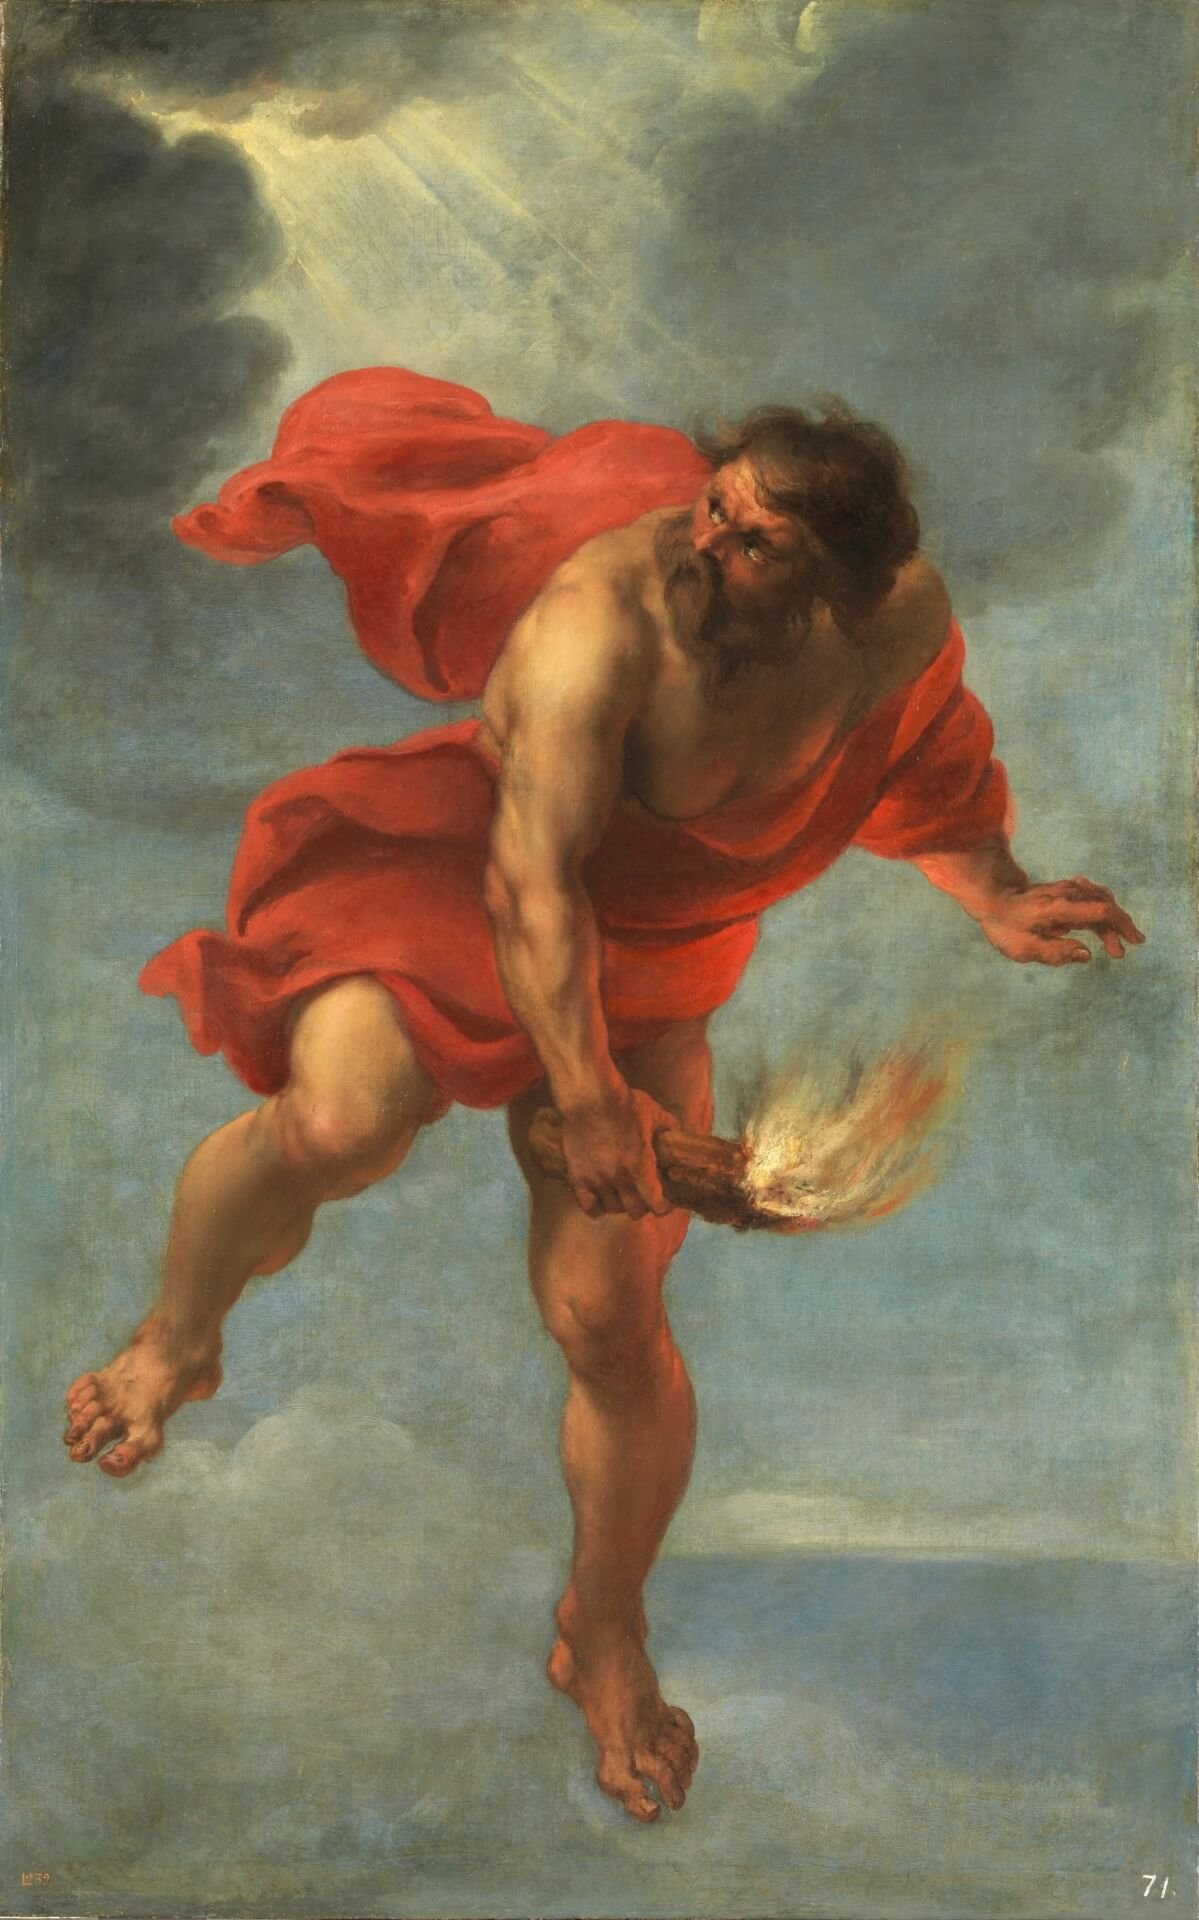 This painting represents Prometheus flying in the sky with a torch of fire.